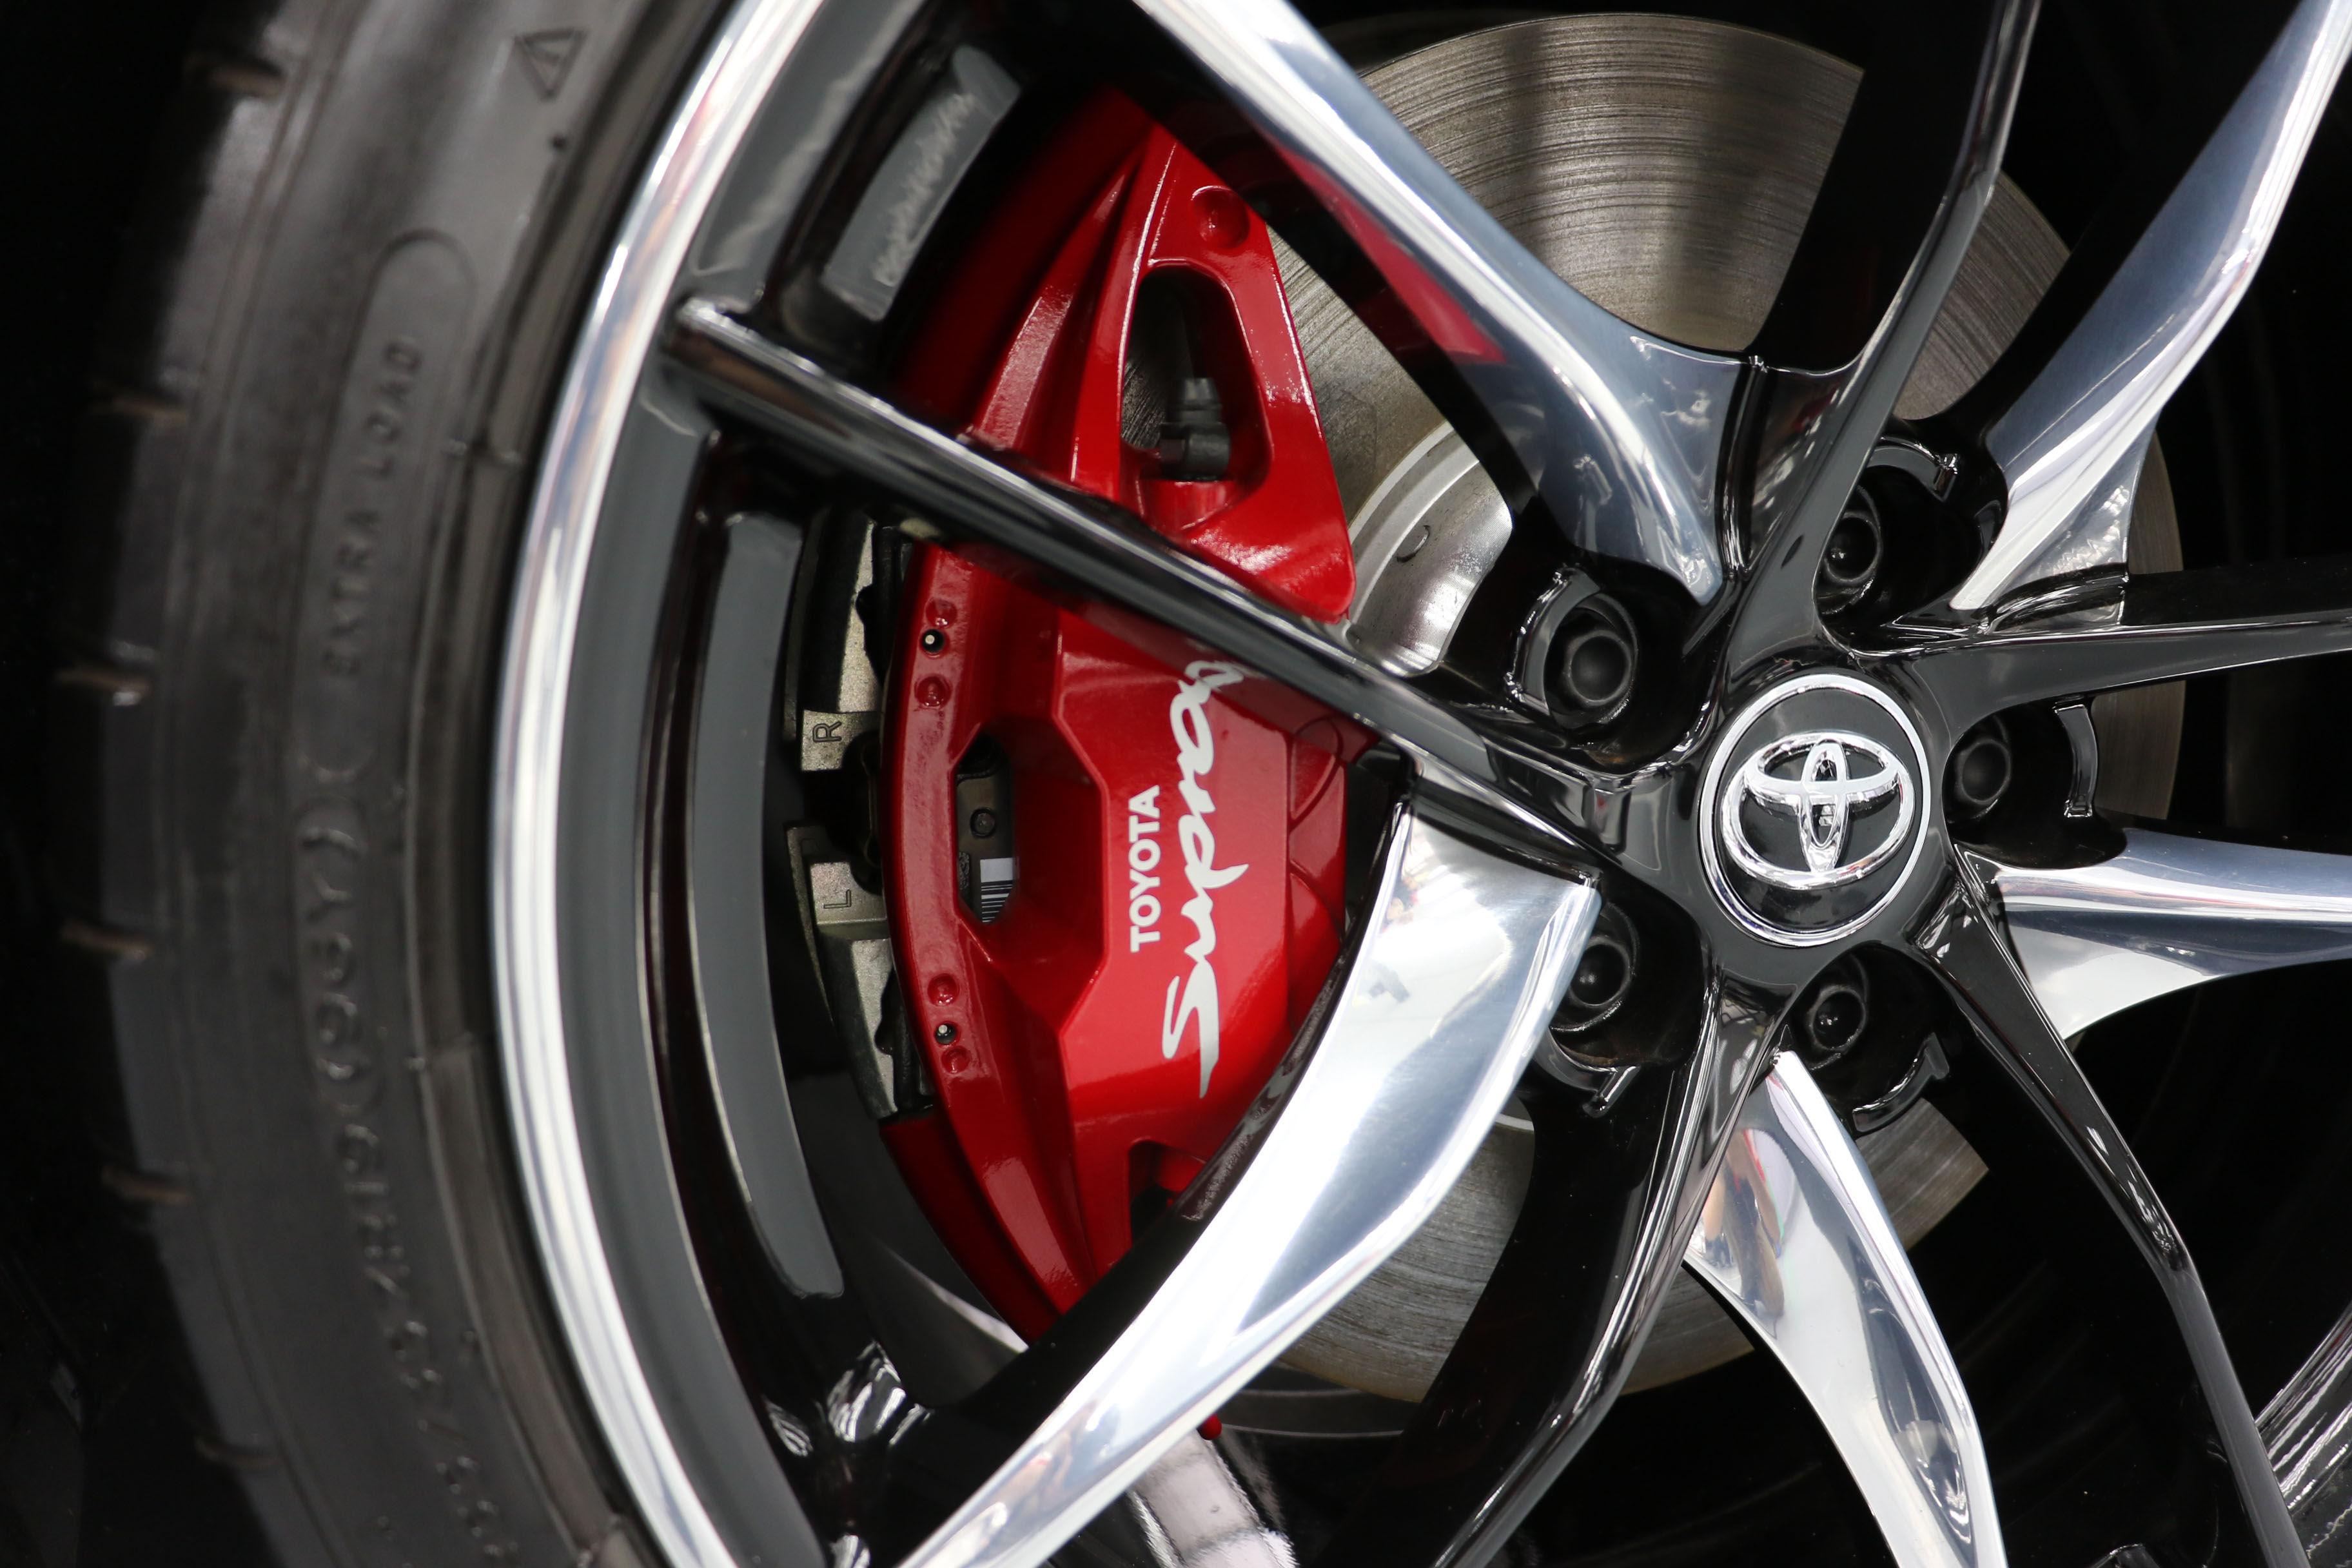 New red-painted brake calipers